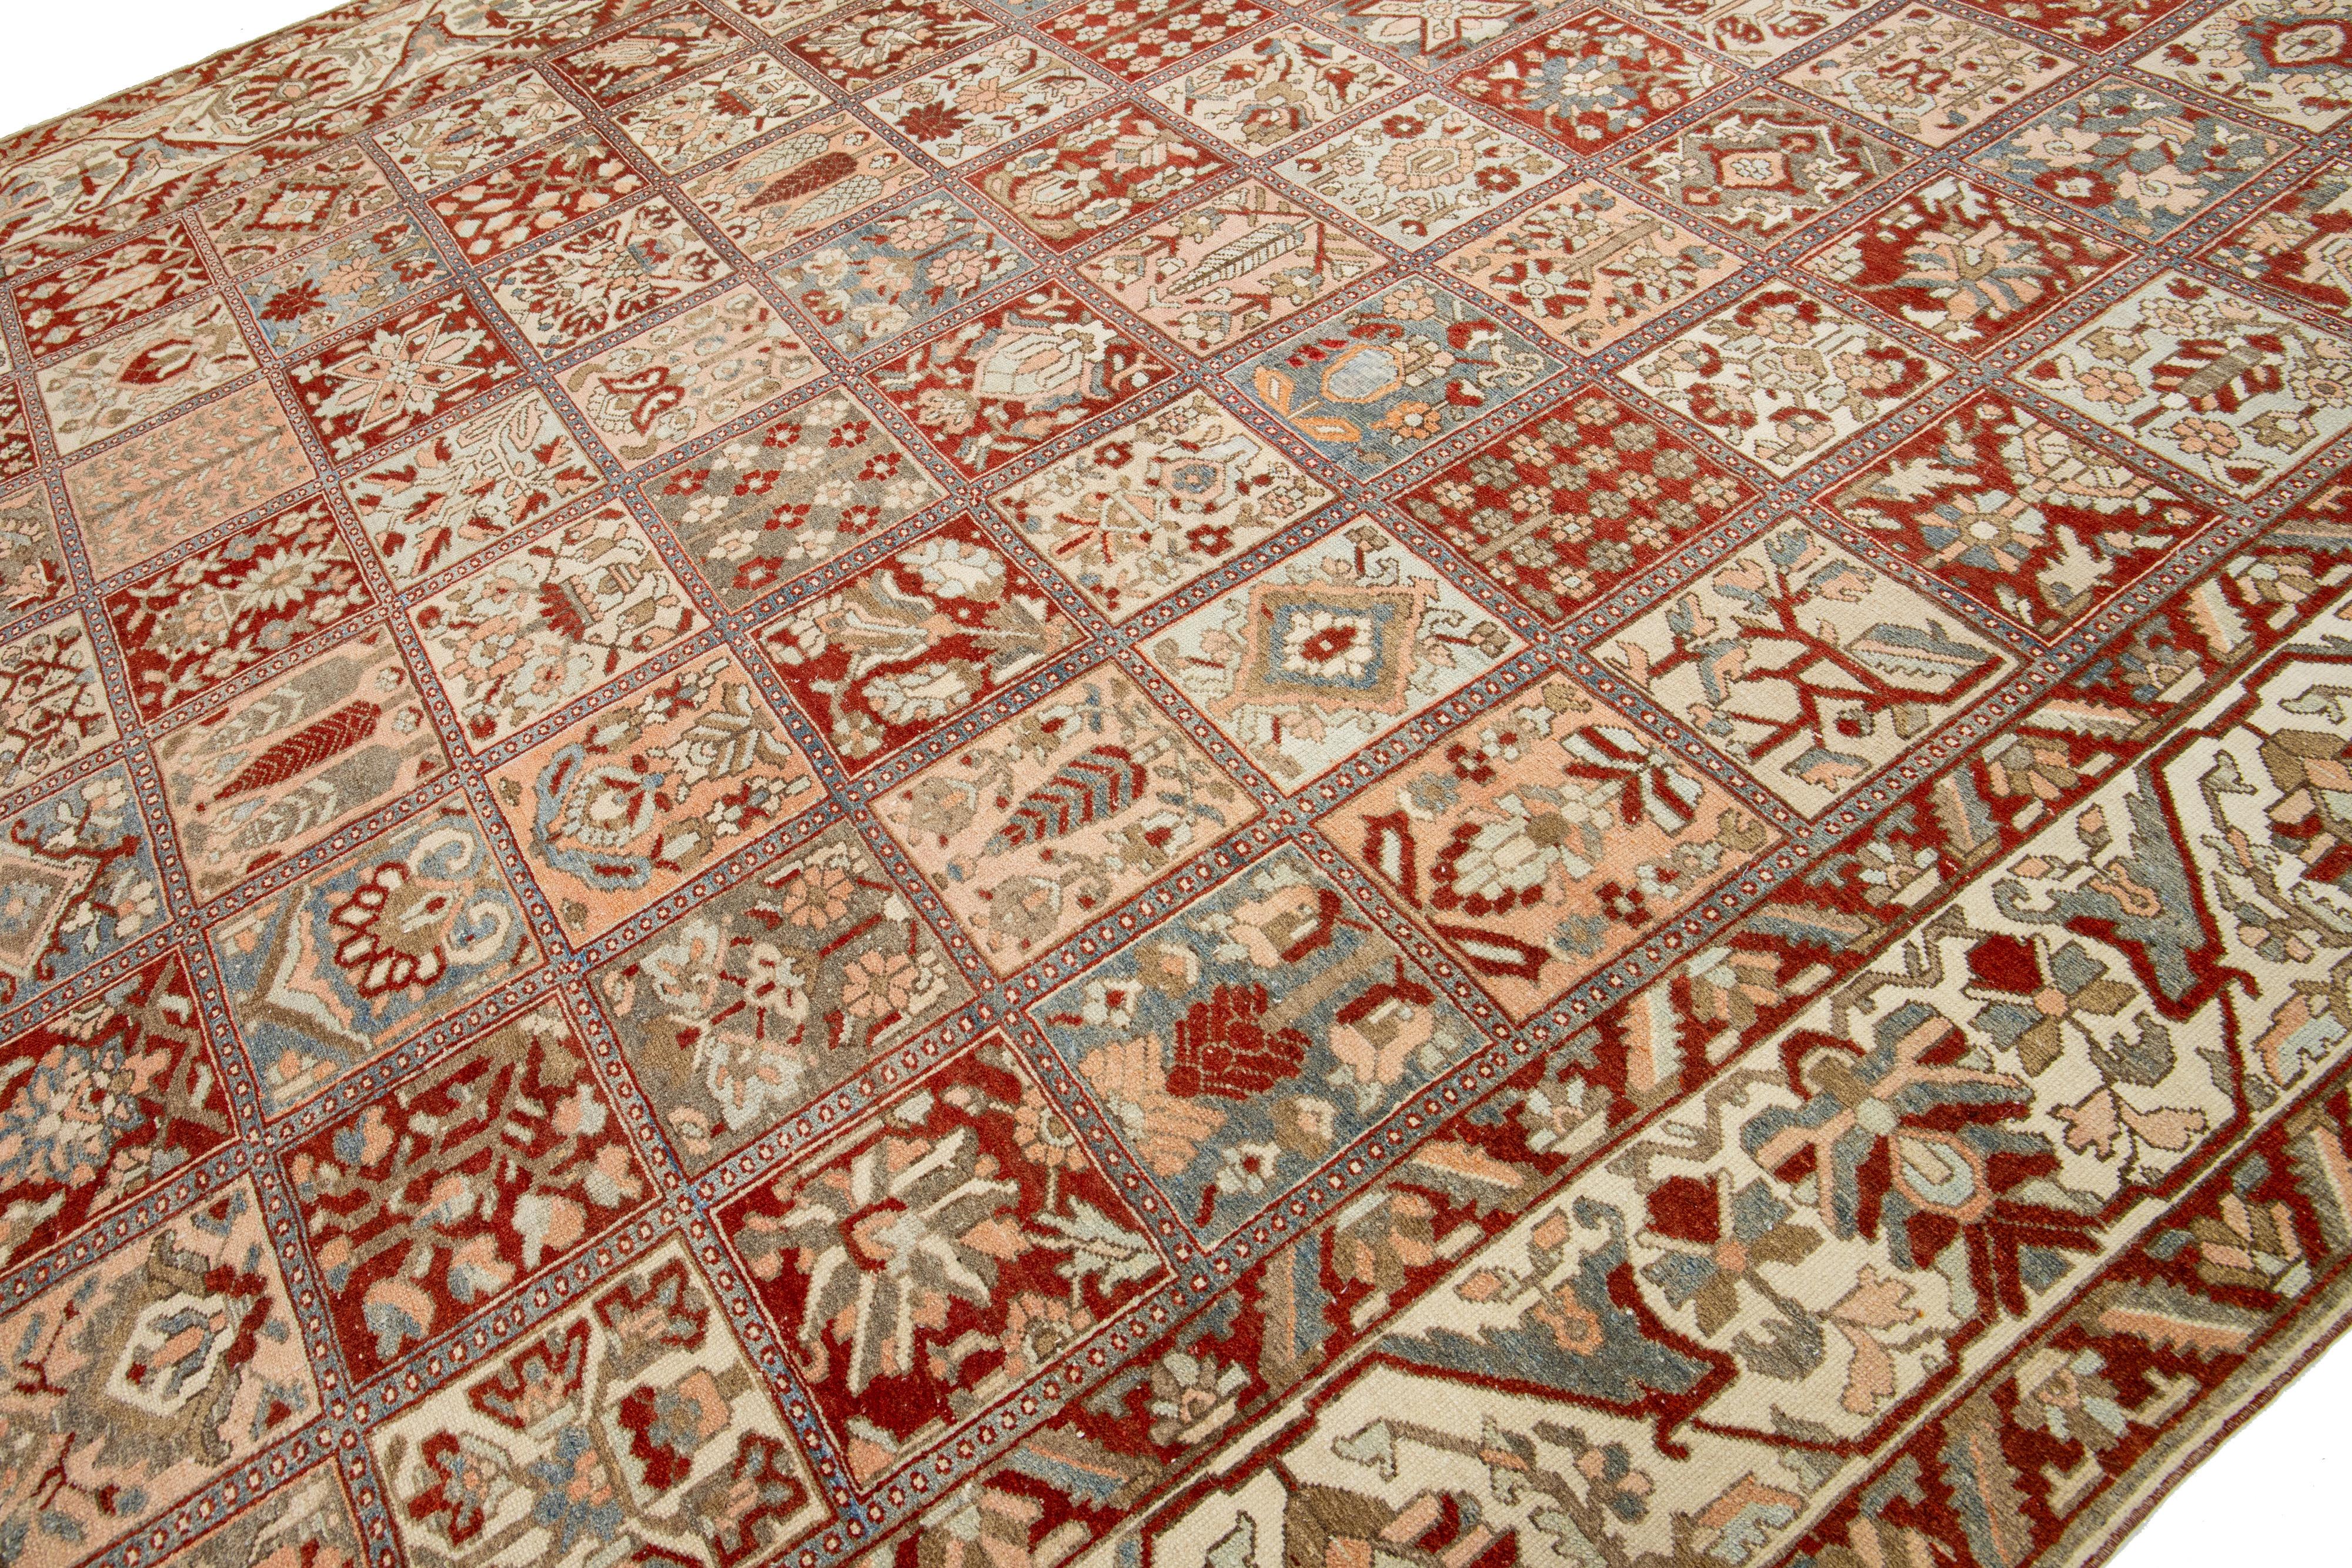 The Floral Persian Bakhtiari Rust Wool Rug Handcrafted in the 1920s (Islamisch) im Angebot